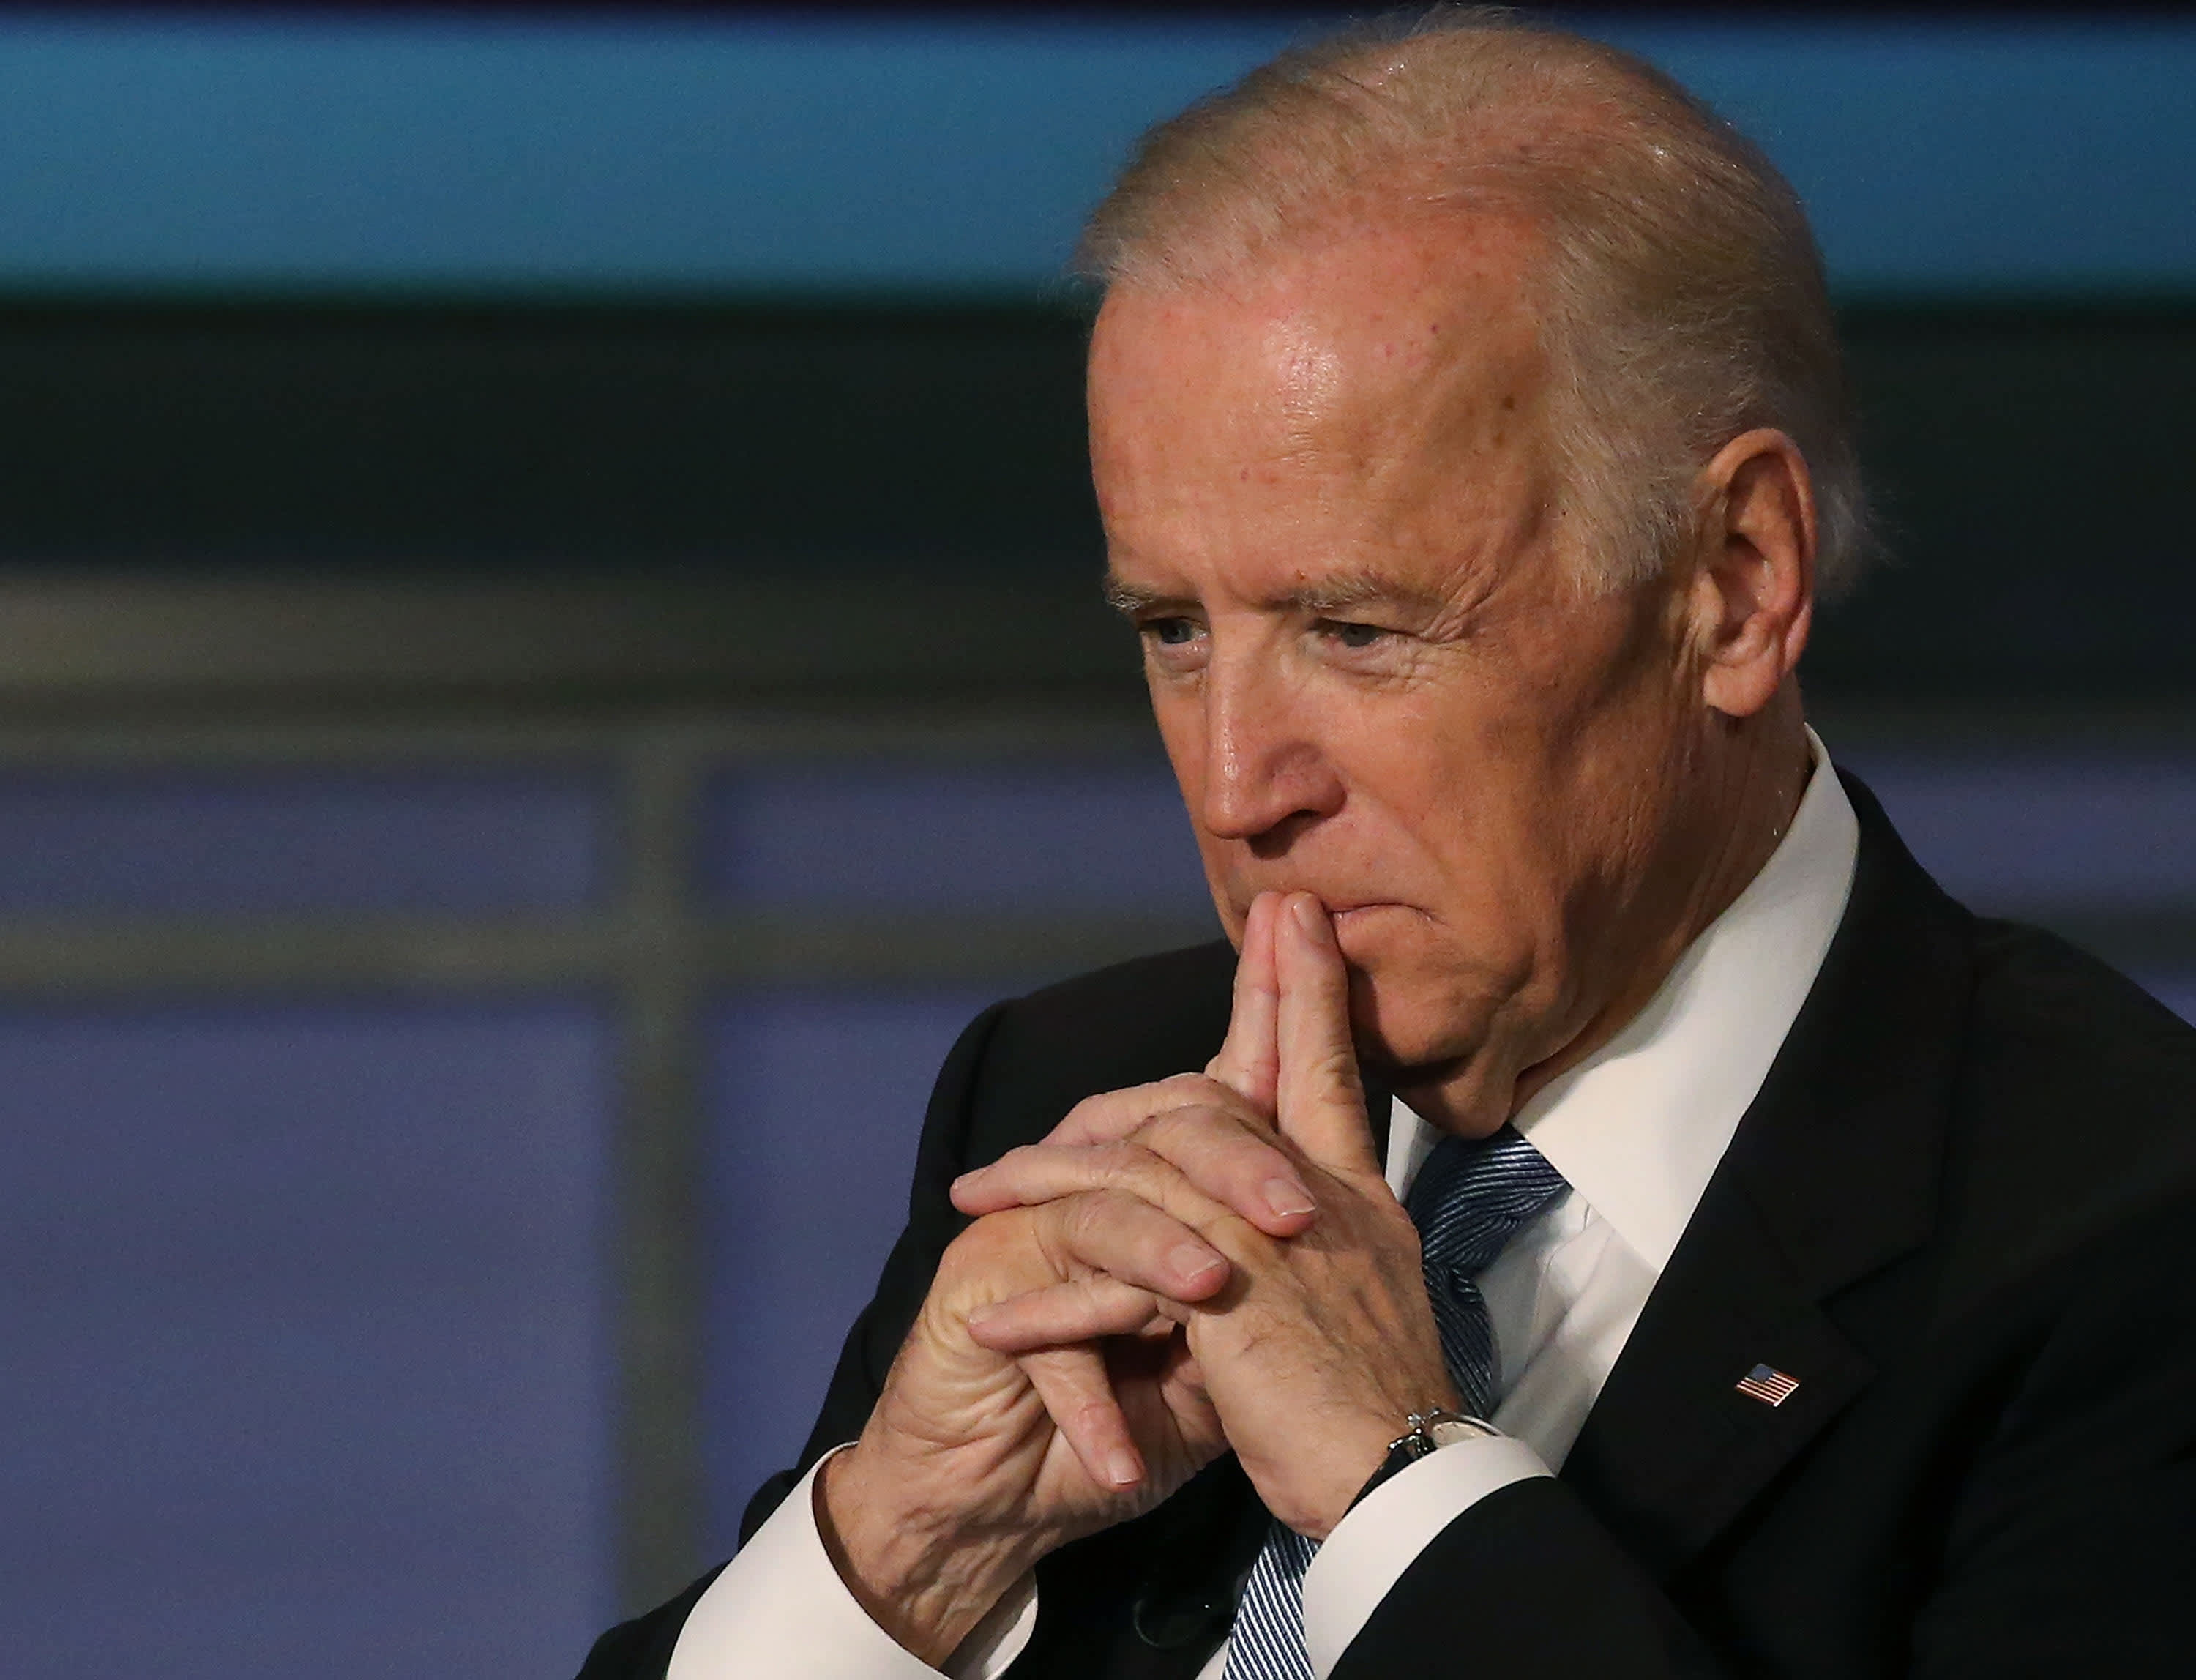 Former vice president Joe Biden: I could have won the 2016 election